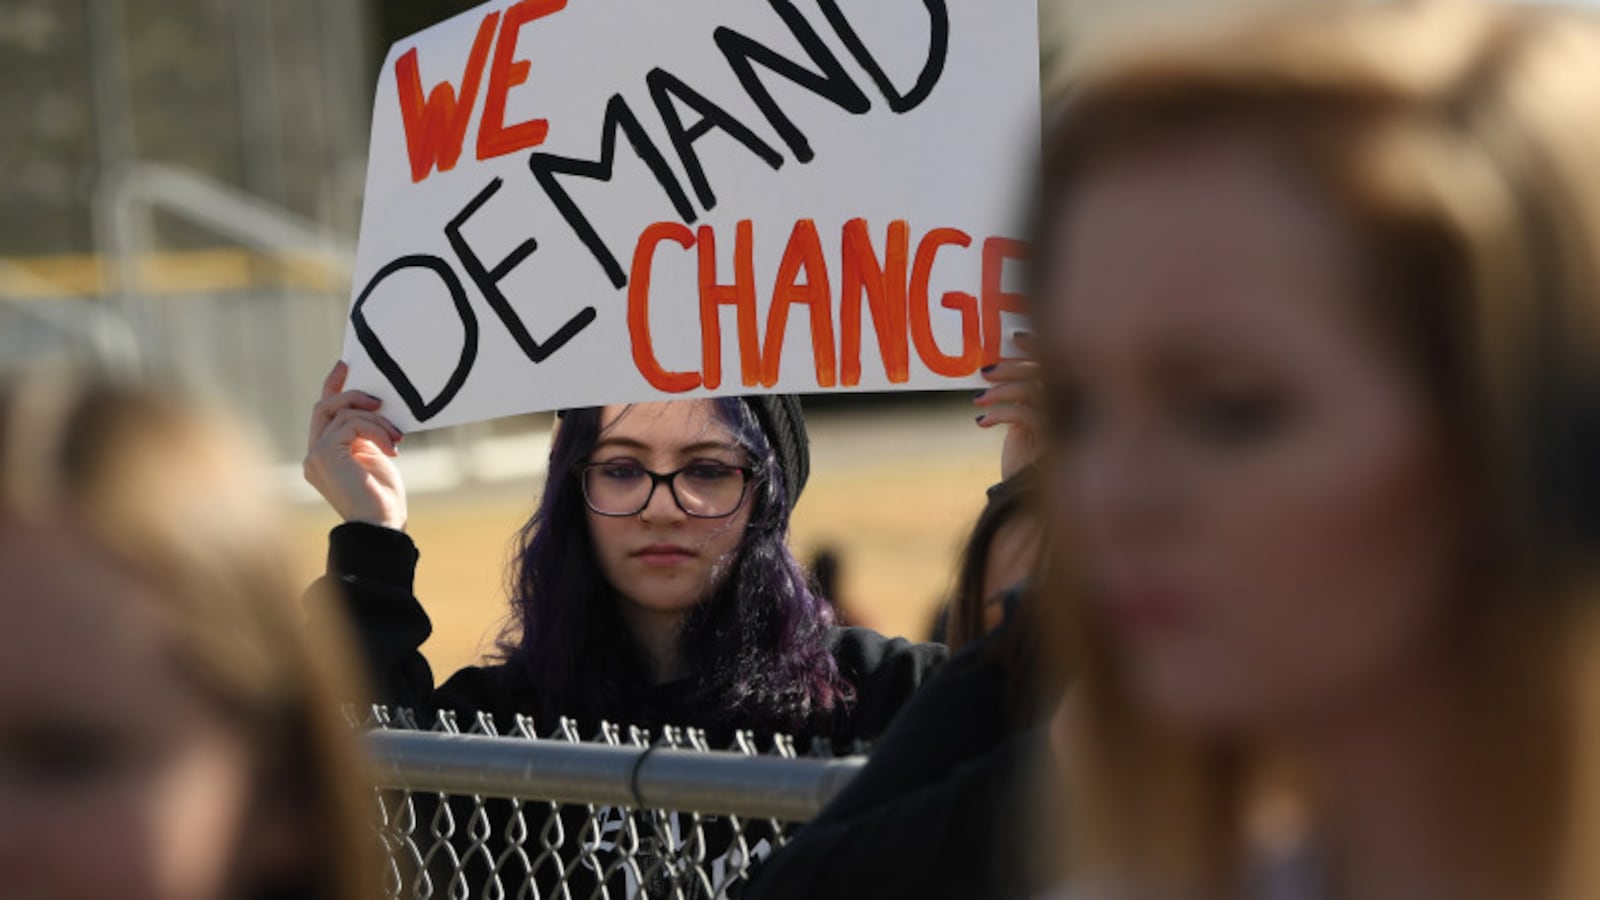 A student at Columbine High School holds a sign during a protest of gun violence, on March 14, 2018 in Littleton, Colorado.